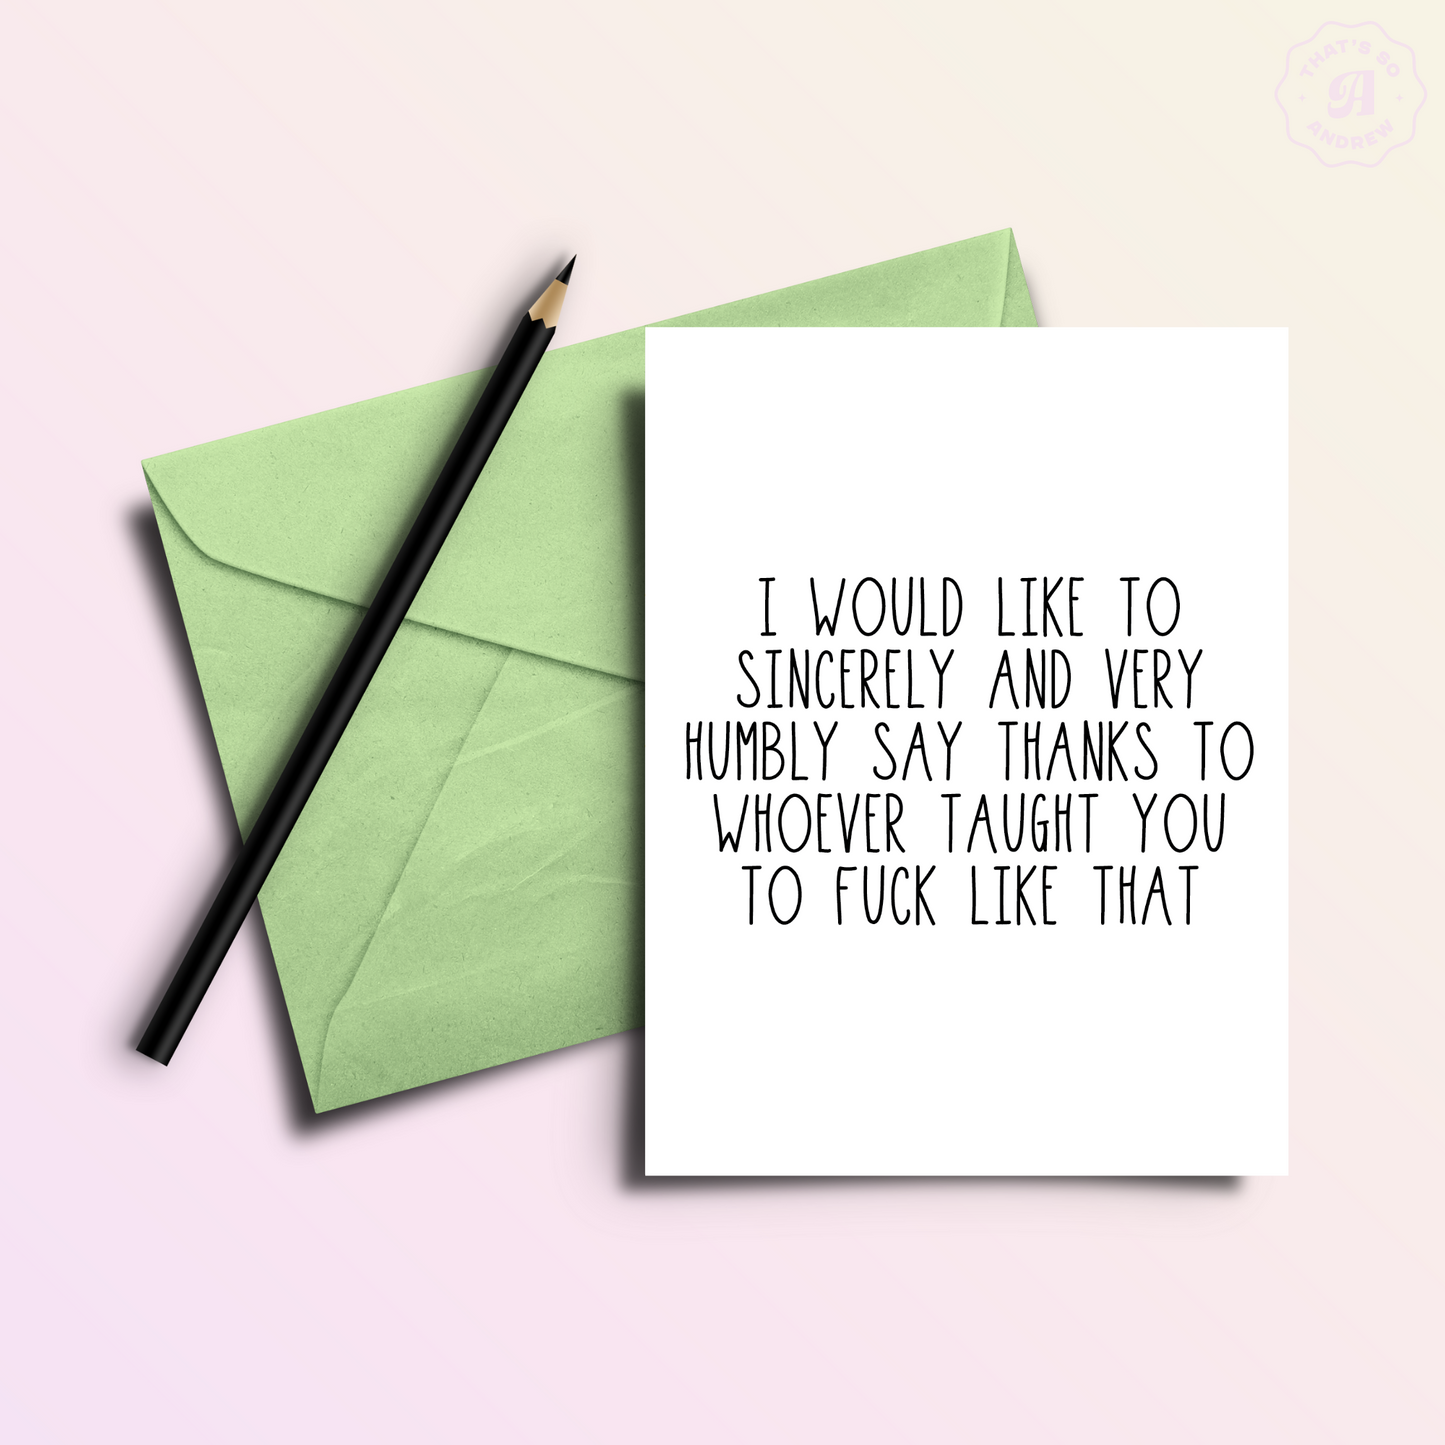 You Fuck Great | Funny and Dirty Adult Greeting Card